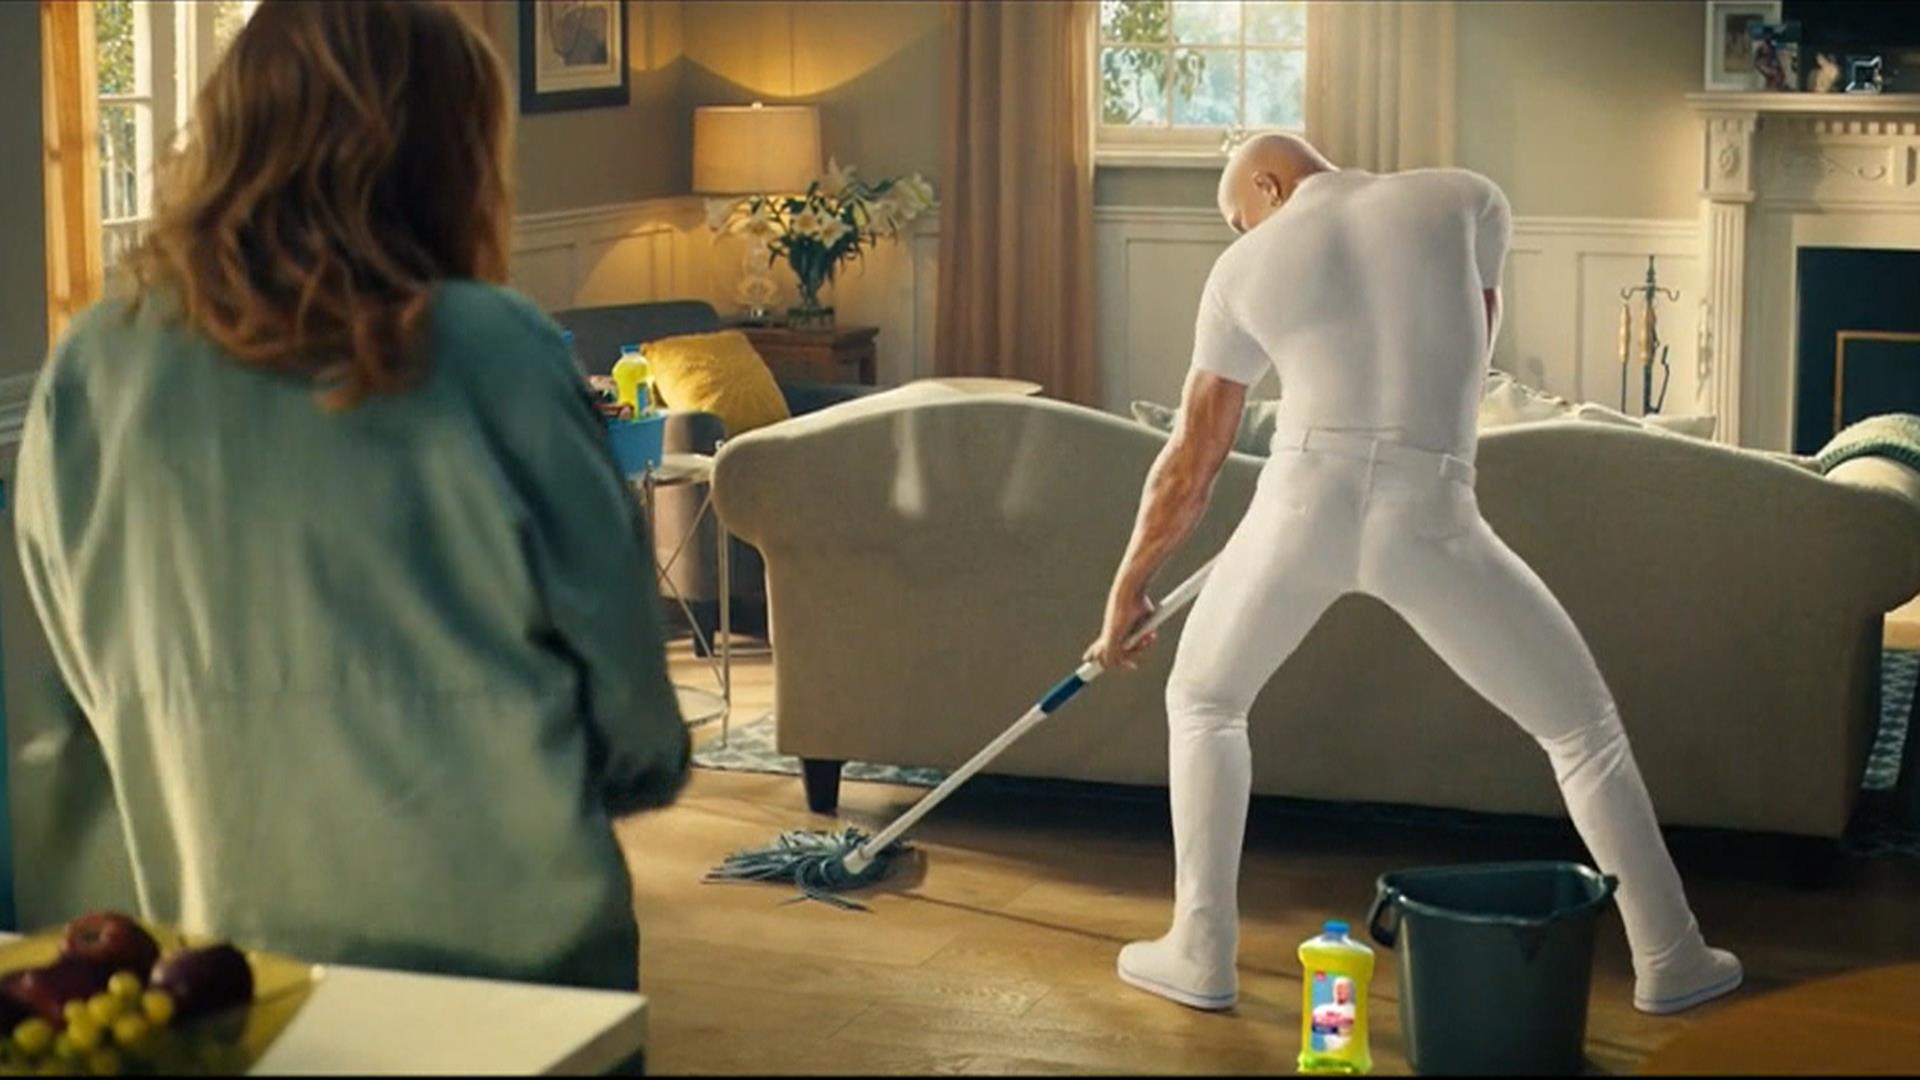 Meet the sexy new Mr. Clean: First look at hilarious Super Bowl ad